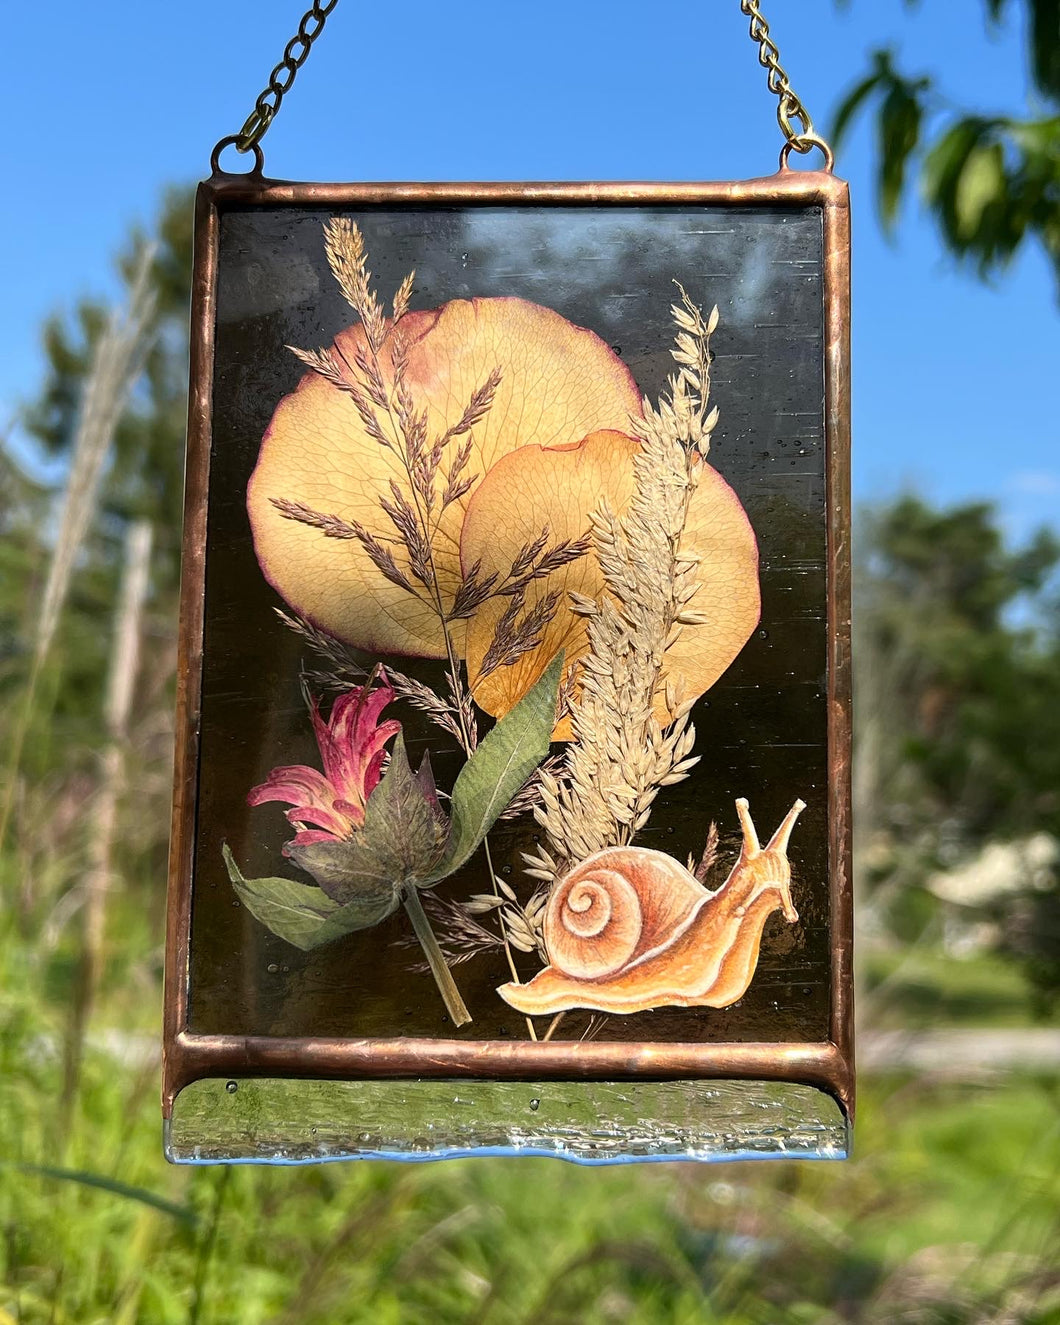 Painted snail in gouache on paper with ressed rose petals, bee balm, and wild grasses with dark purple glass backing and glass end on bottom to mimic SNAIL SLIME. Rectangle shape with gold hanging chain.